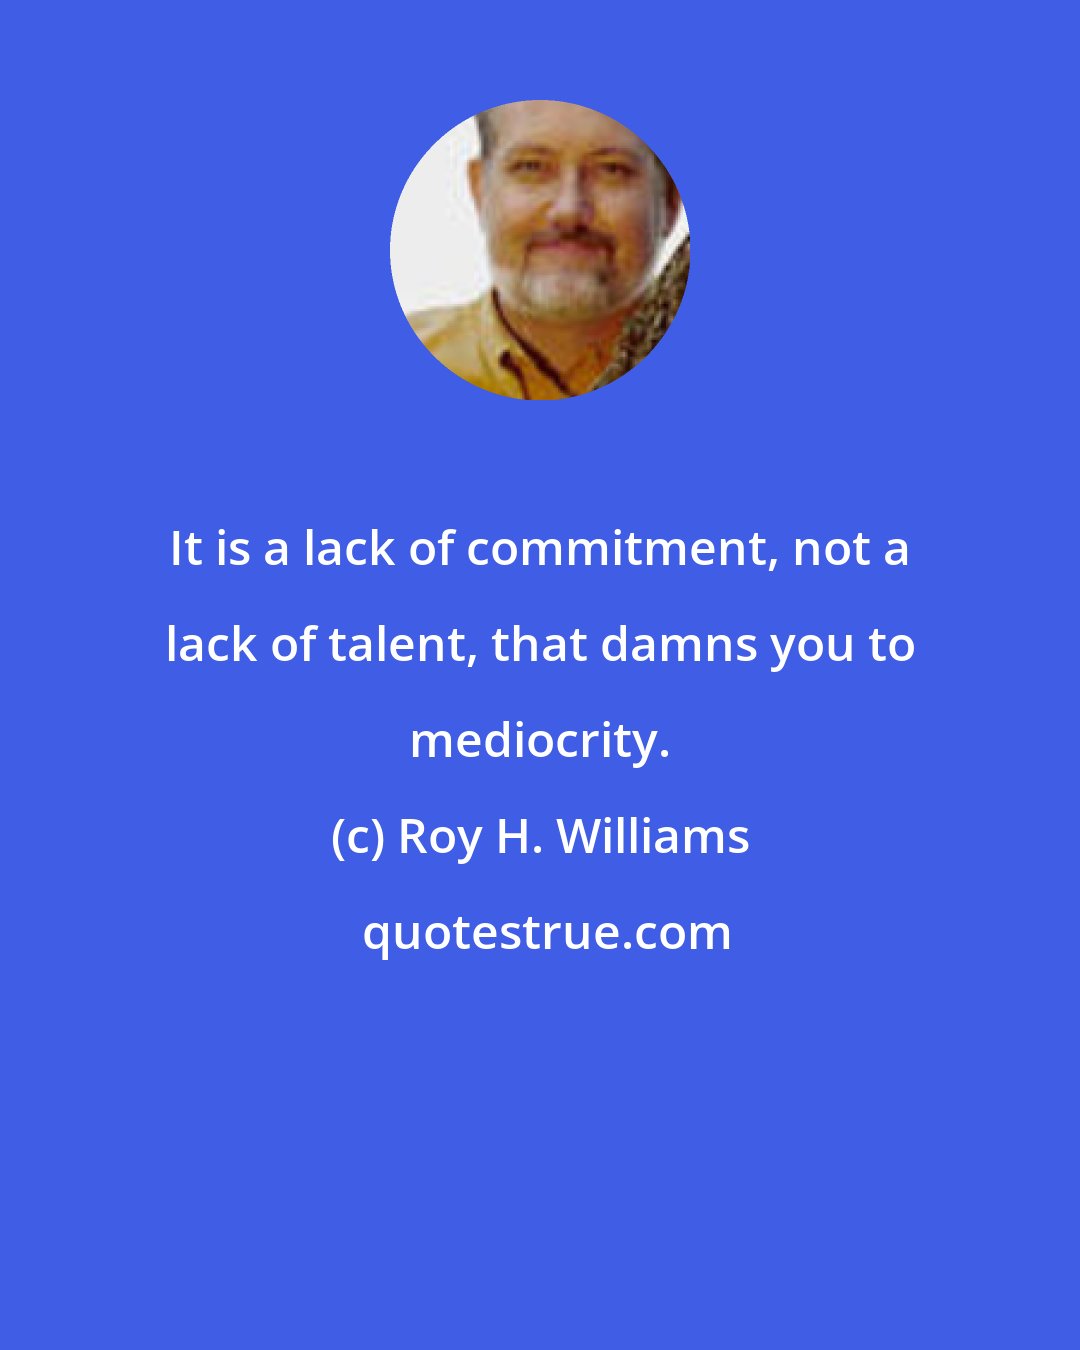 Roy H. Williams: It is a lack of commitment, not a lack of talent, that damns you to mediocrity.